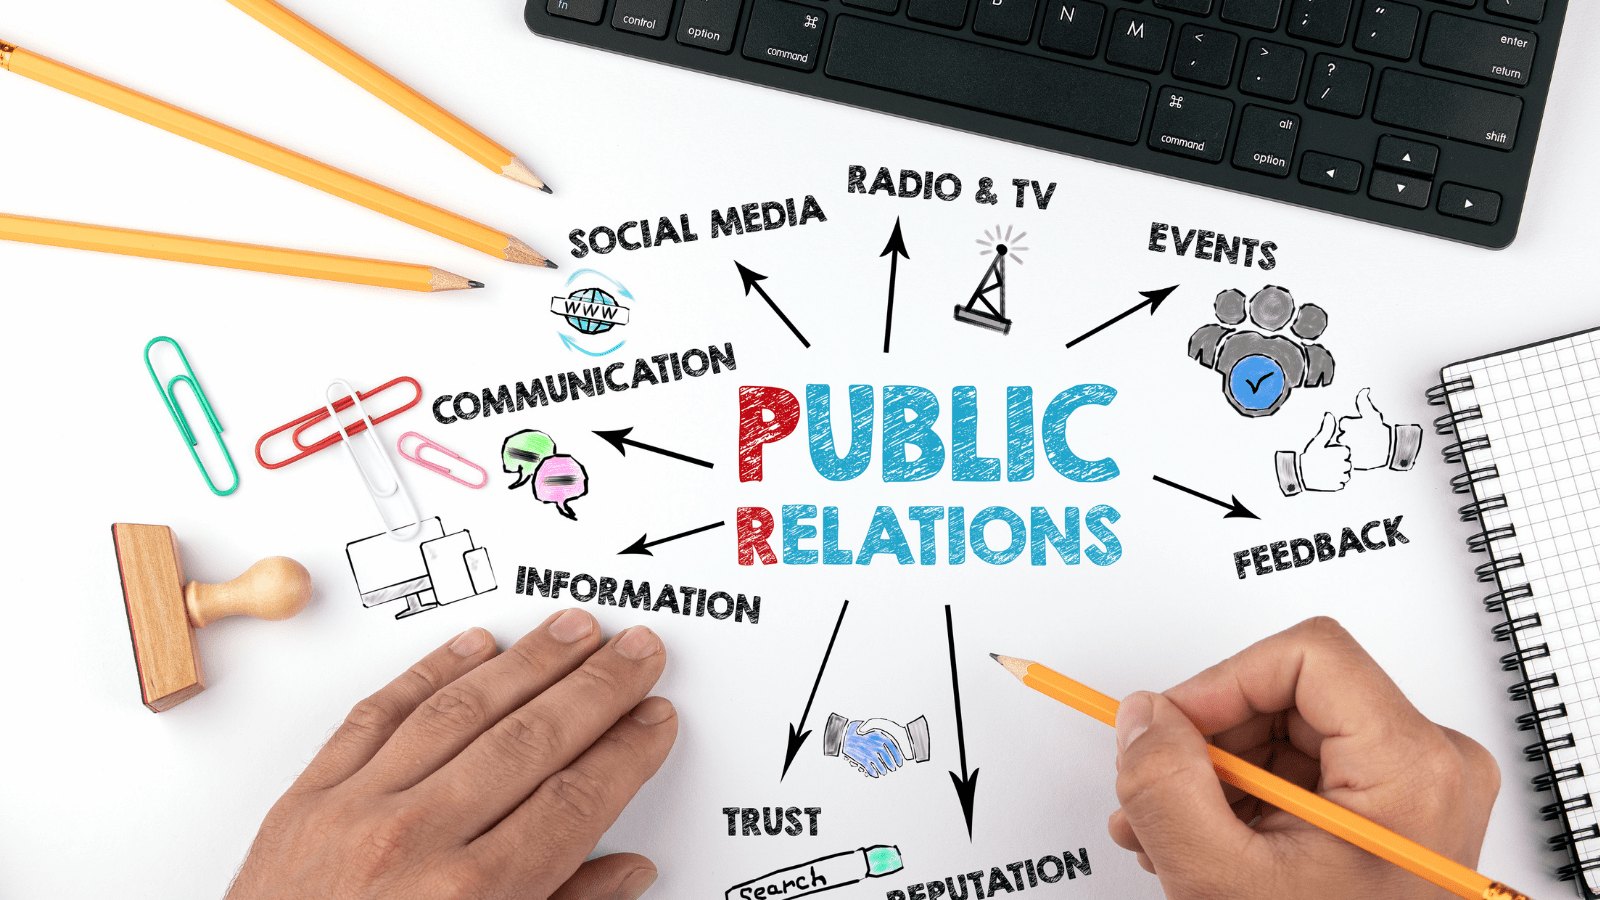 PR and reputation management go hand-in-hand